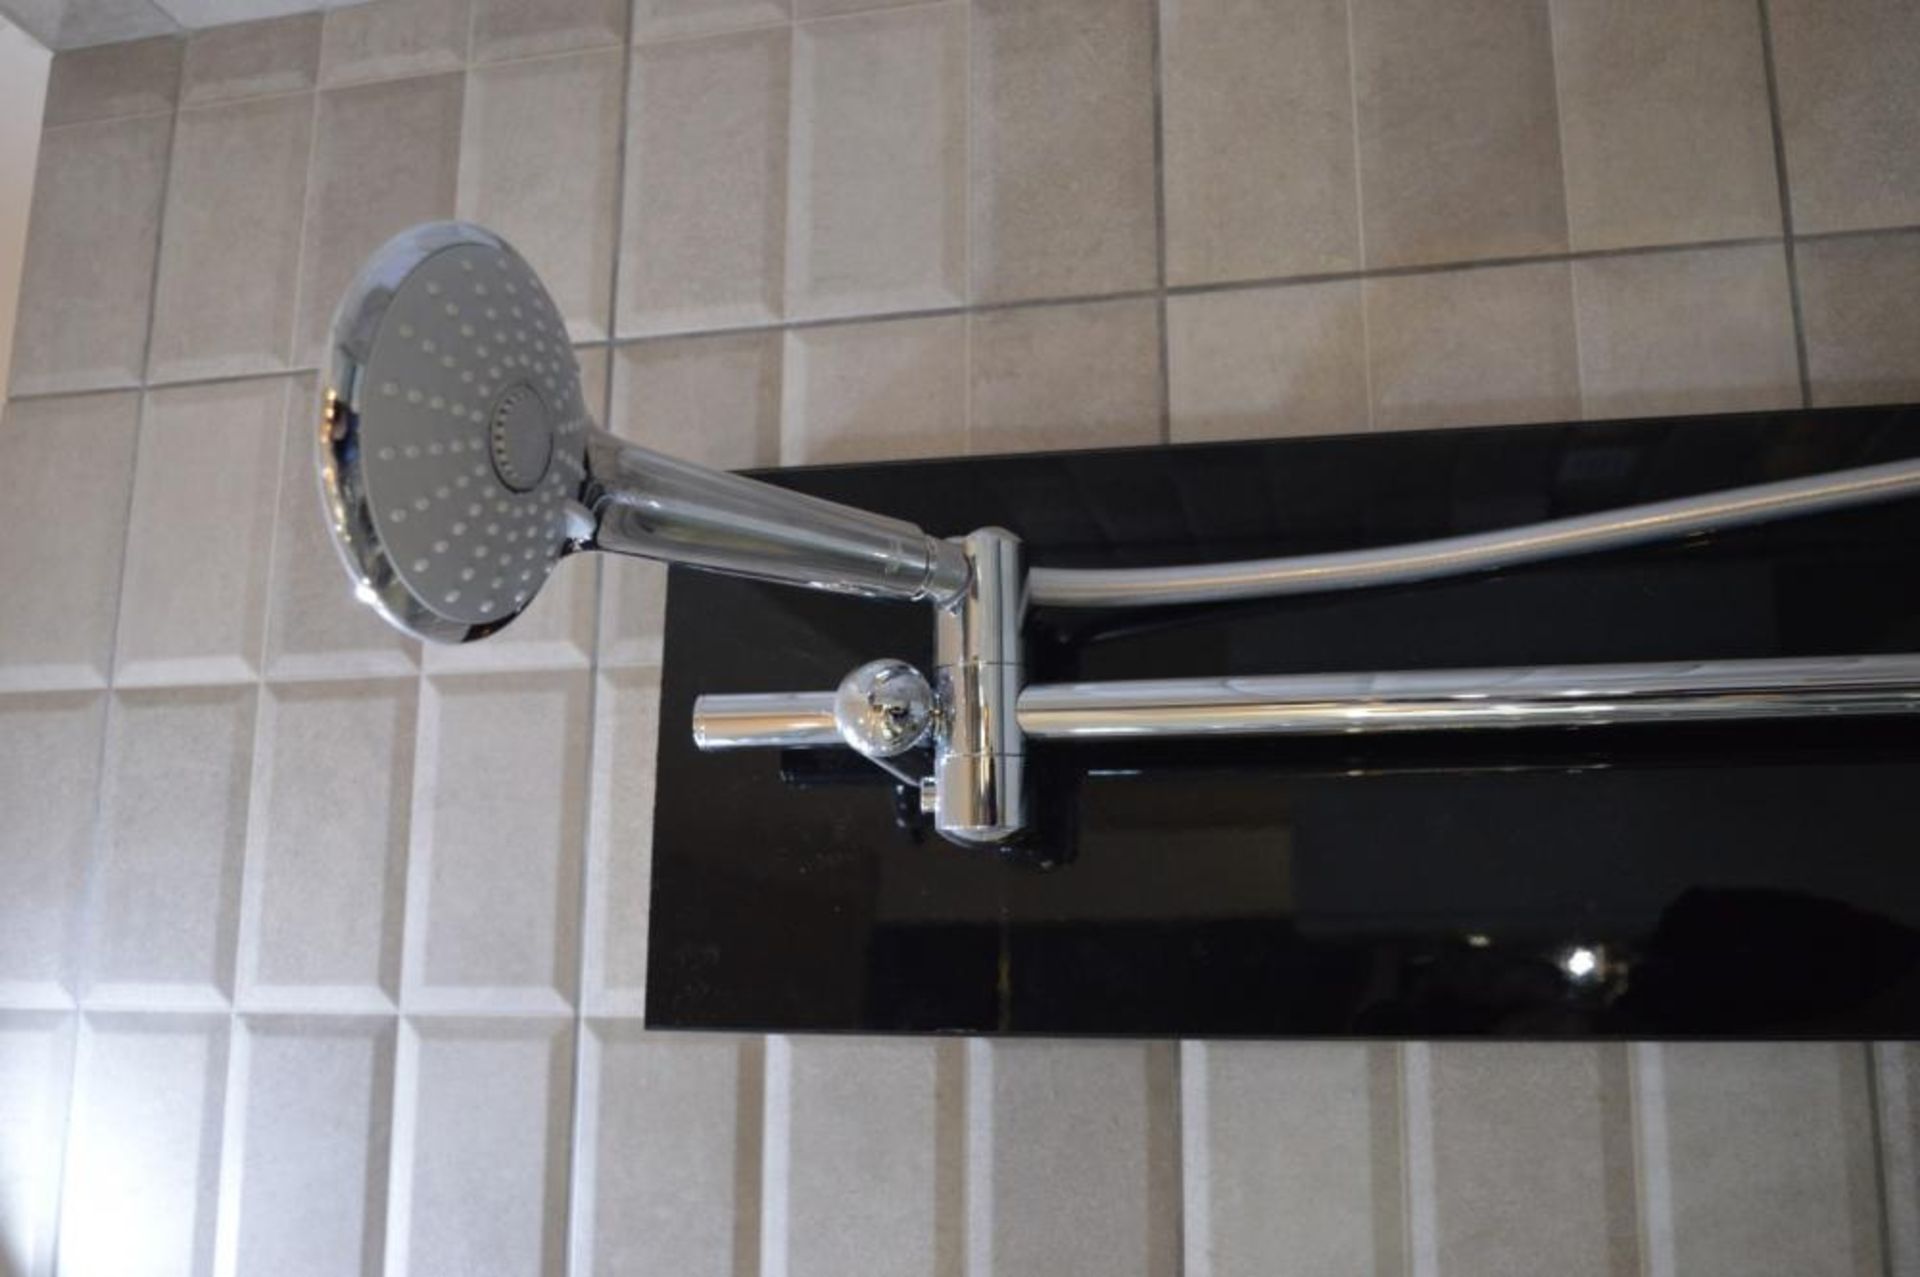 1 x Grohe Cosmo GRT1000 Thermostatic Shower Kit in Chrome - CL406 - Ref H294A - Location: Cheadle SK - Image 2 of 3